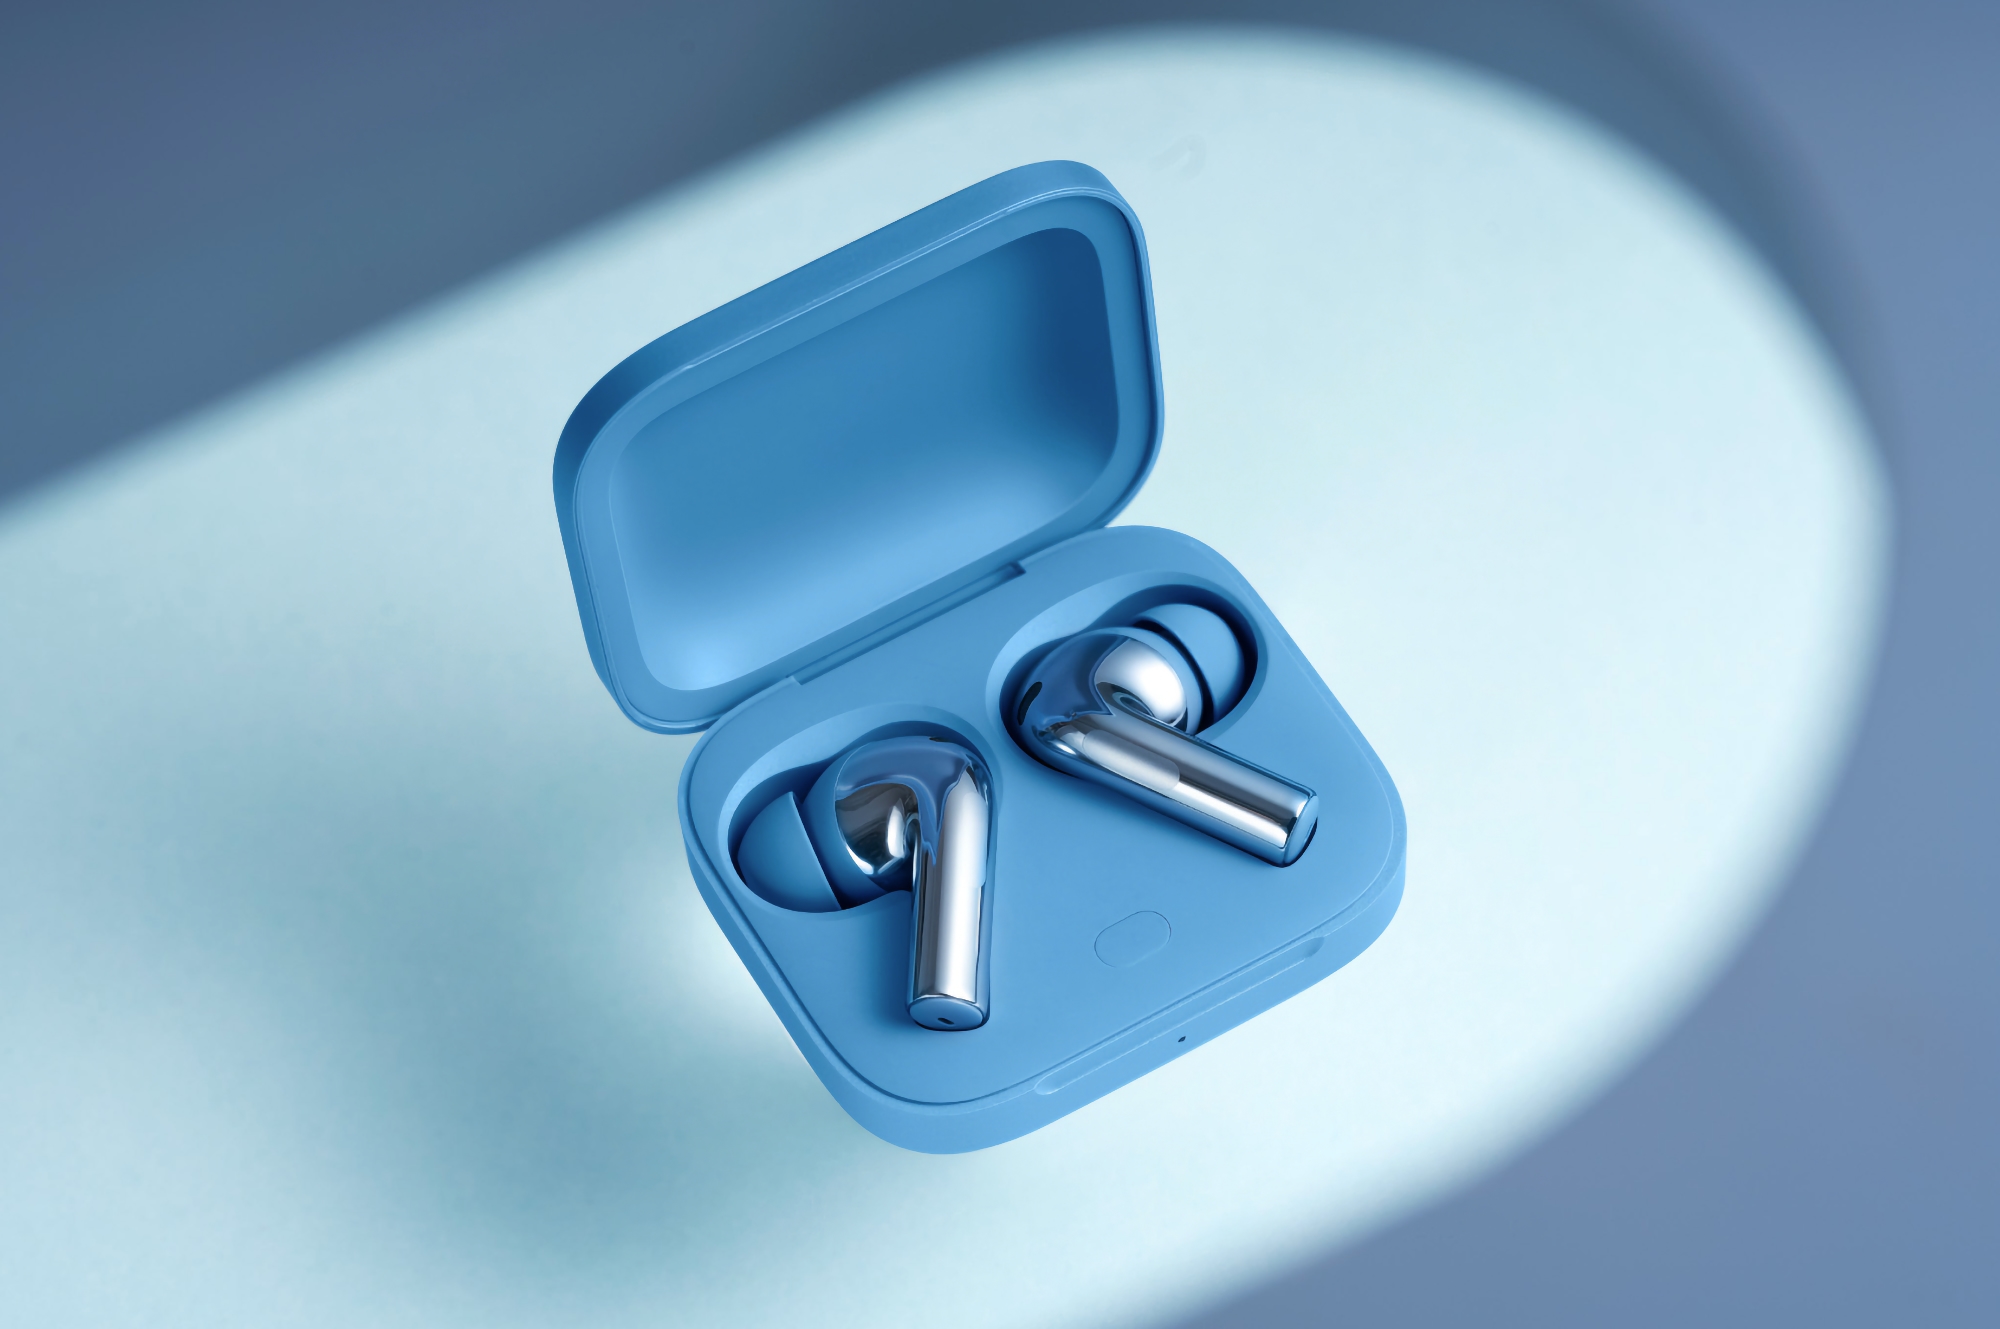 OnePlus has revealed some of the features of the OnePlus Buds 3 TWS earphones